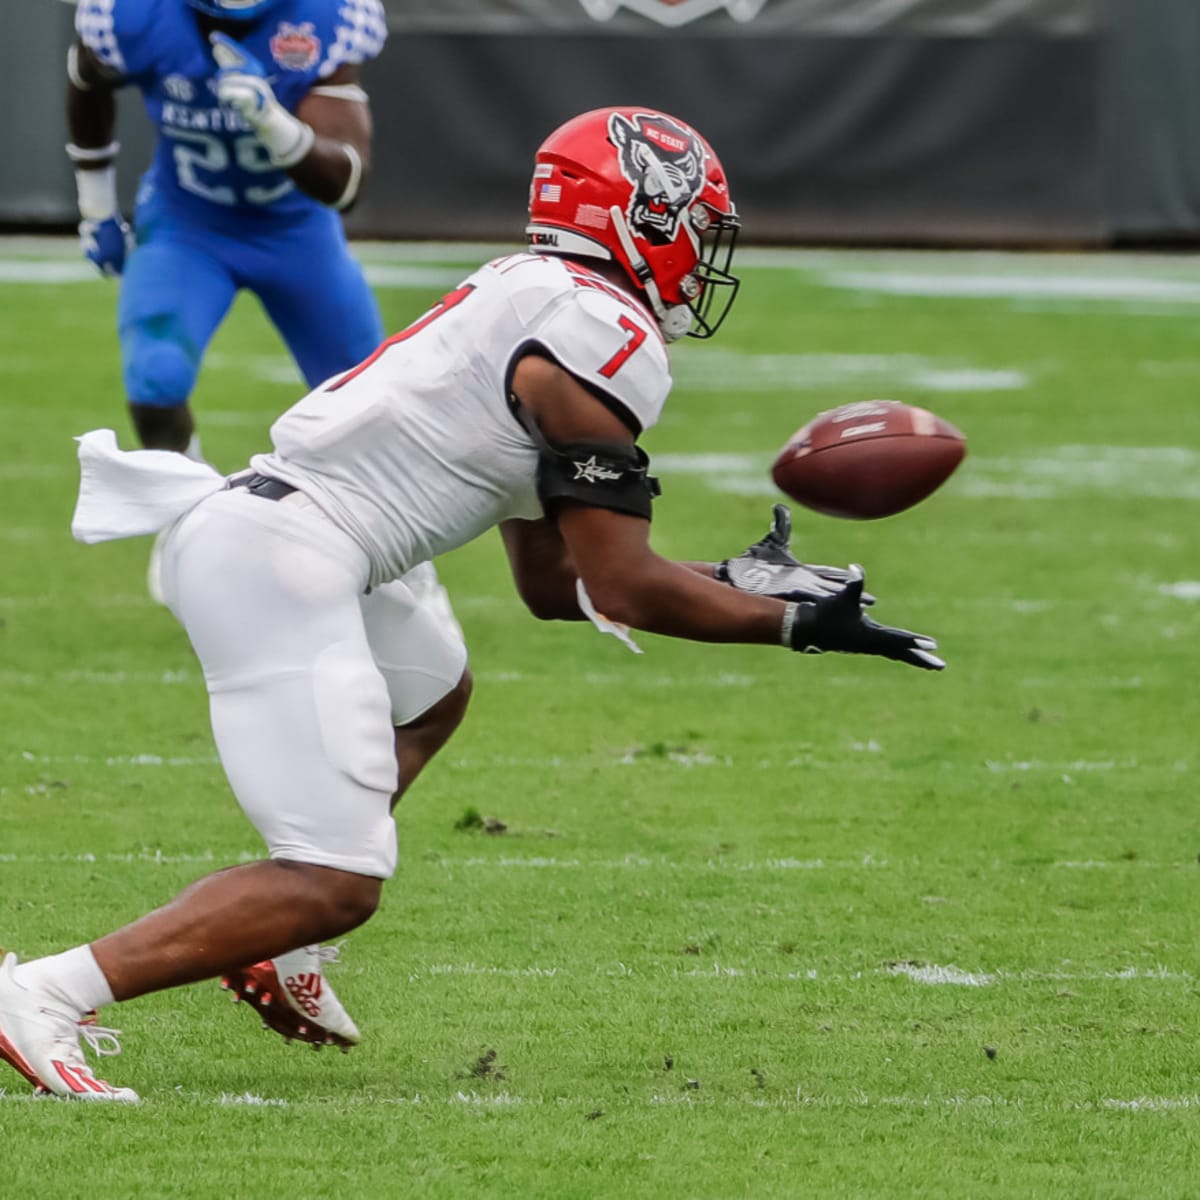 NFL Draft Profile: Zonovan Knight, Running Back, NC State Wolfpack - Visit NFL  Draft on Sports Illustrated, the latest news coverage, with rankings for NFL  Draft prospects, College Football, Dynasty and Devy